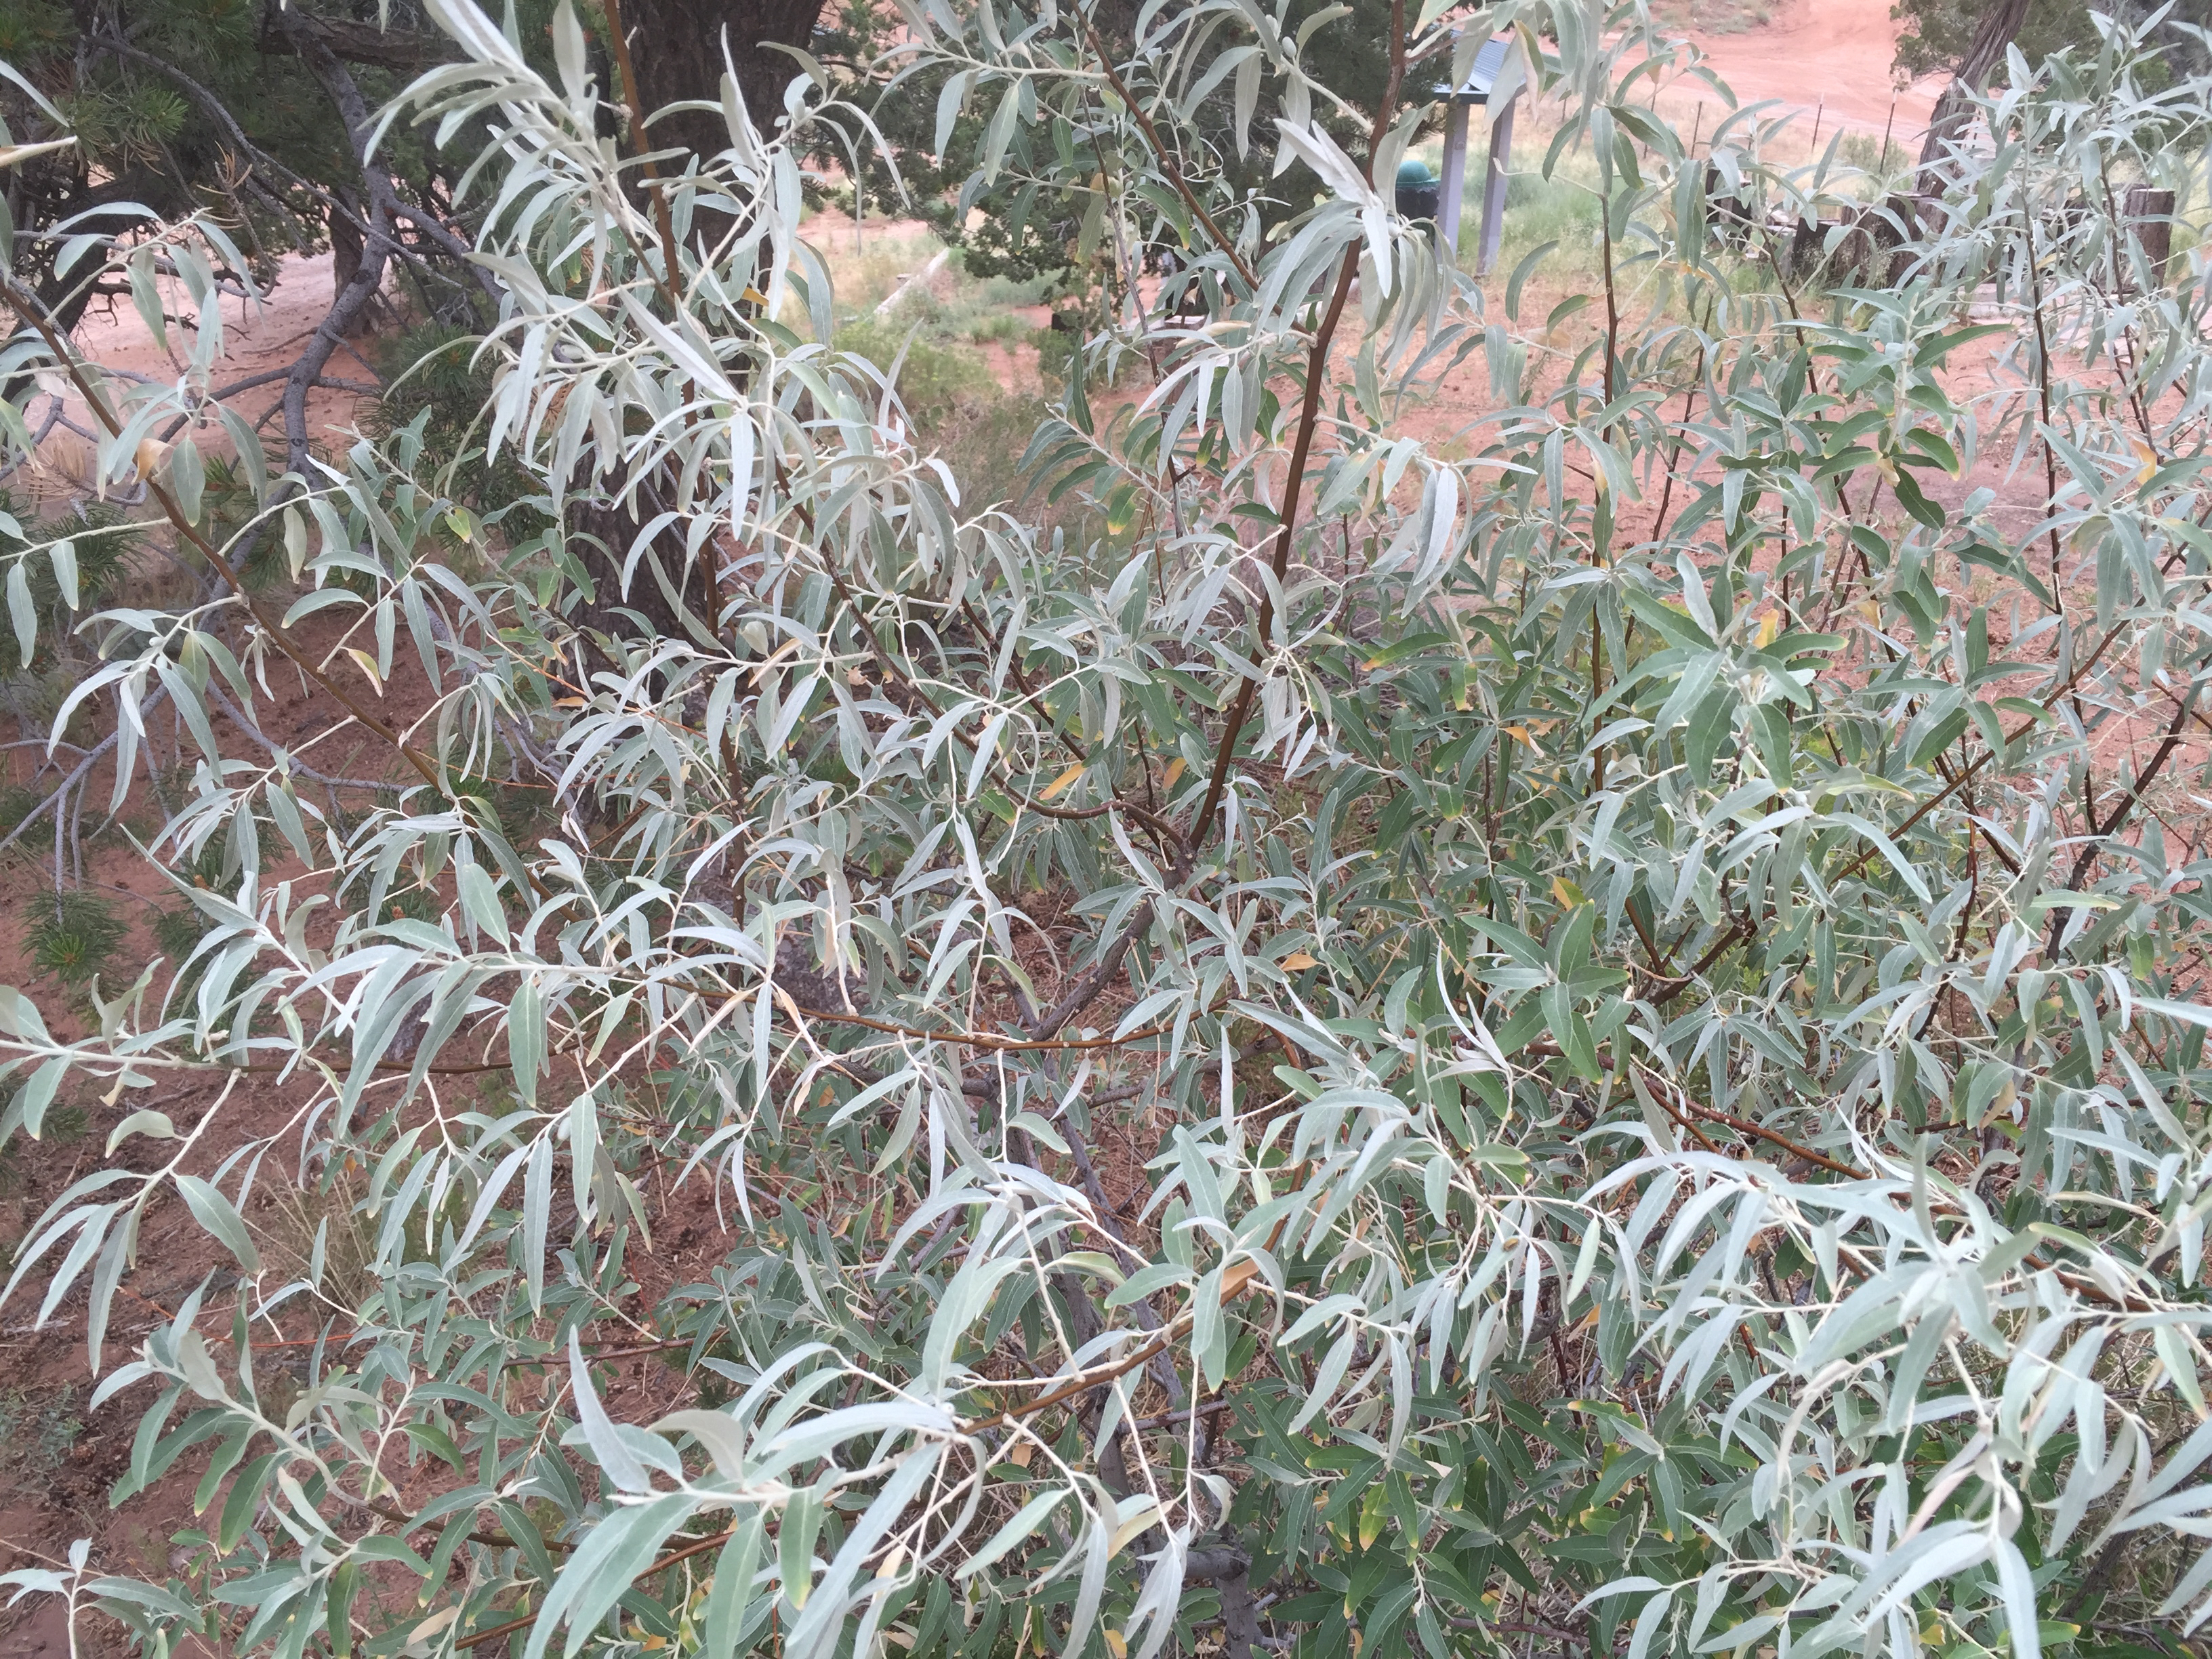 Silvery, lanceolate leaves